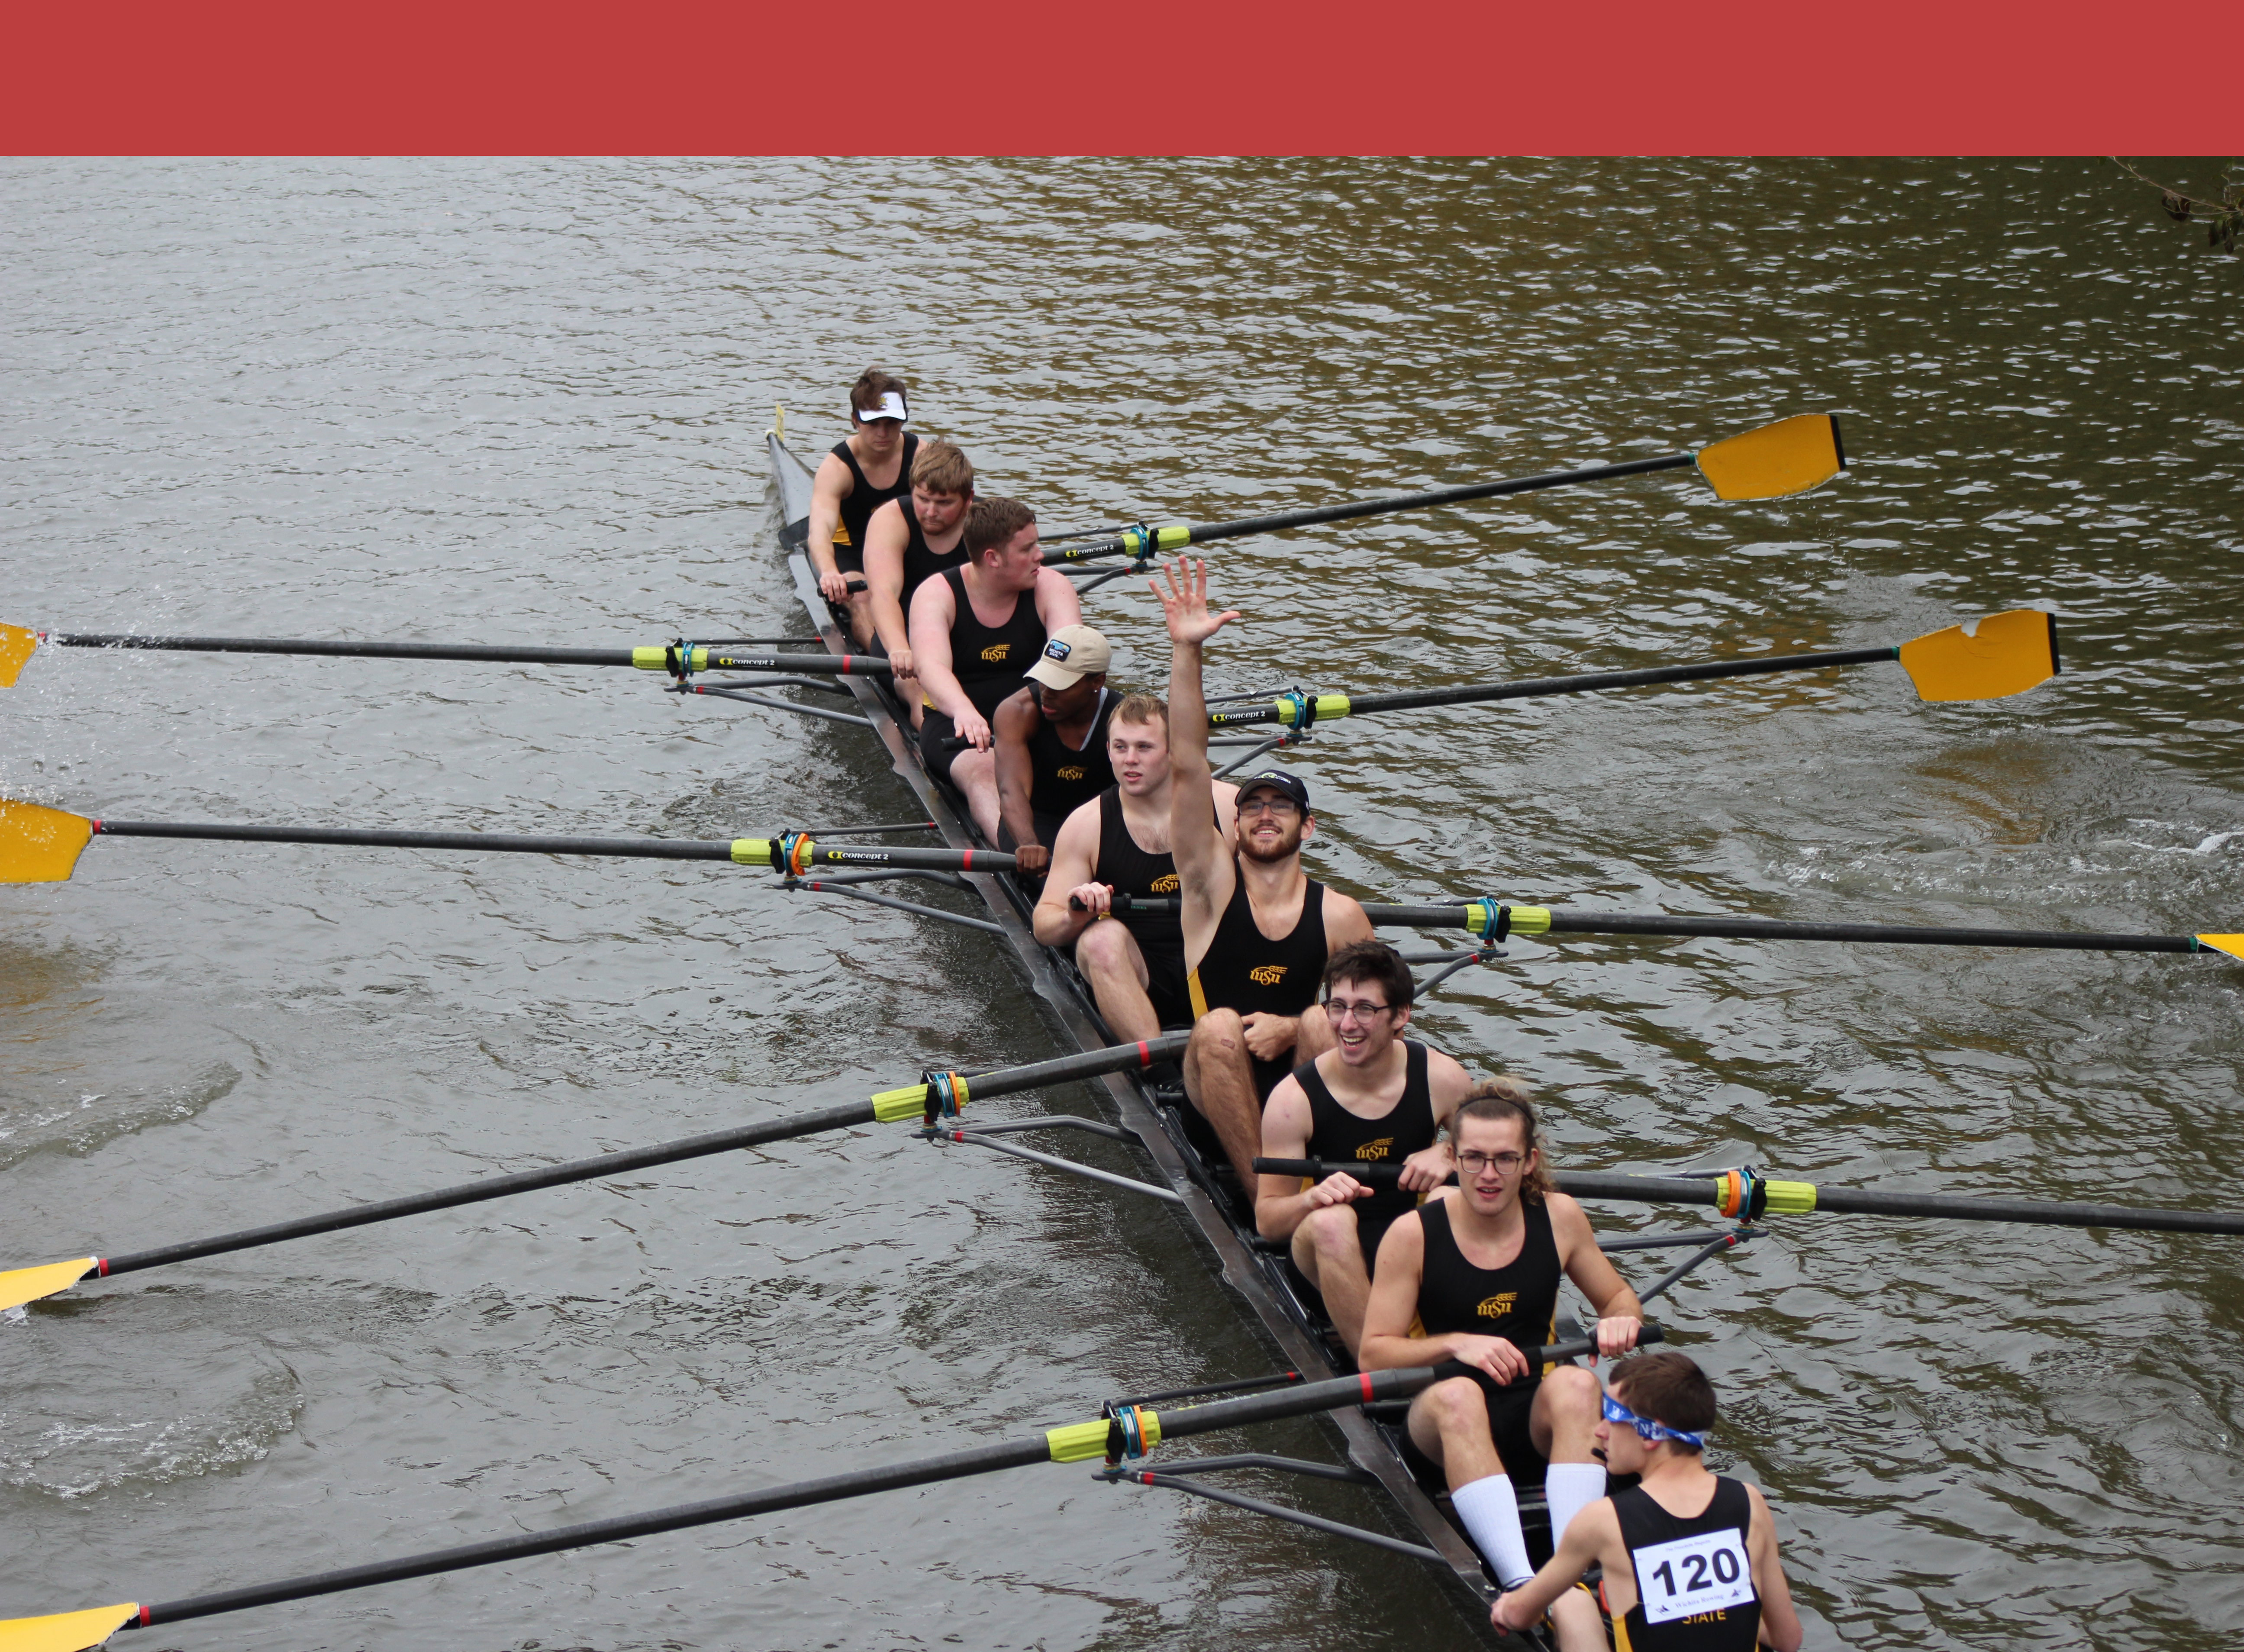 Men's novice 8. One of the men in the middle of the boat has his hand upraised and is smiling at the camera. All the rest are focused on rowing like good rowers.